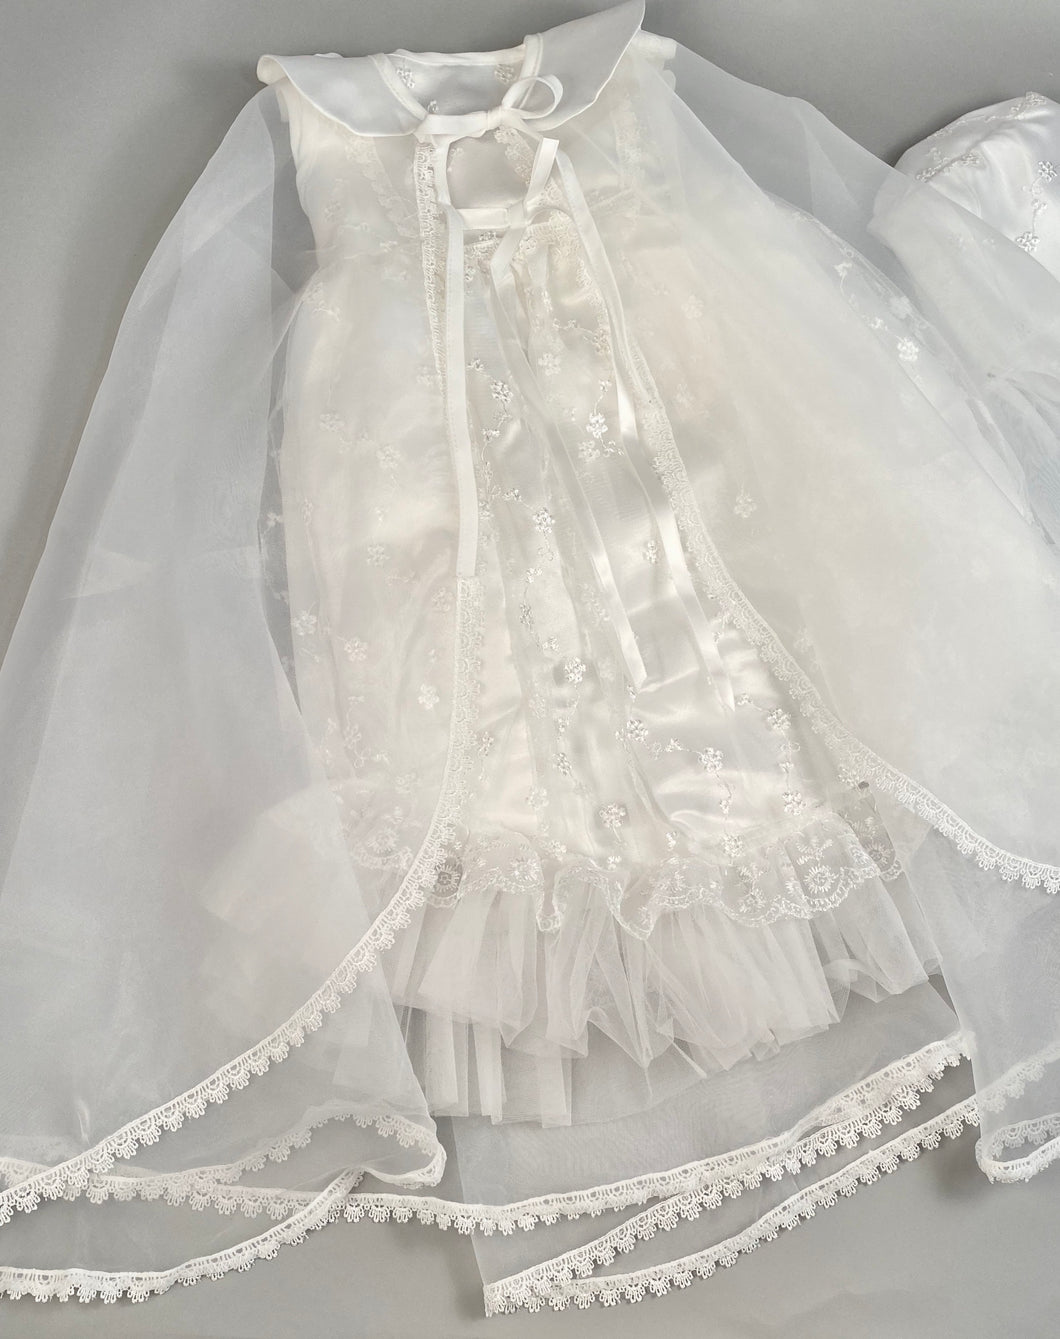 Lace Gown 4 Girls Christening Baptismal Embroidered Lace Gown with Matching Cape and Hat